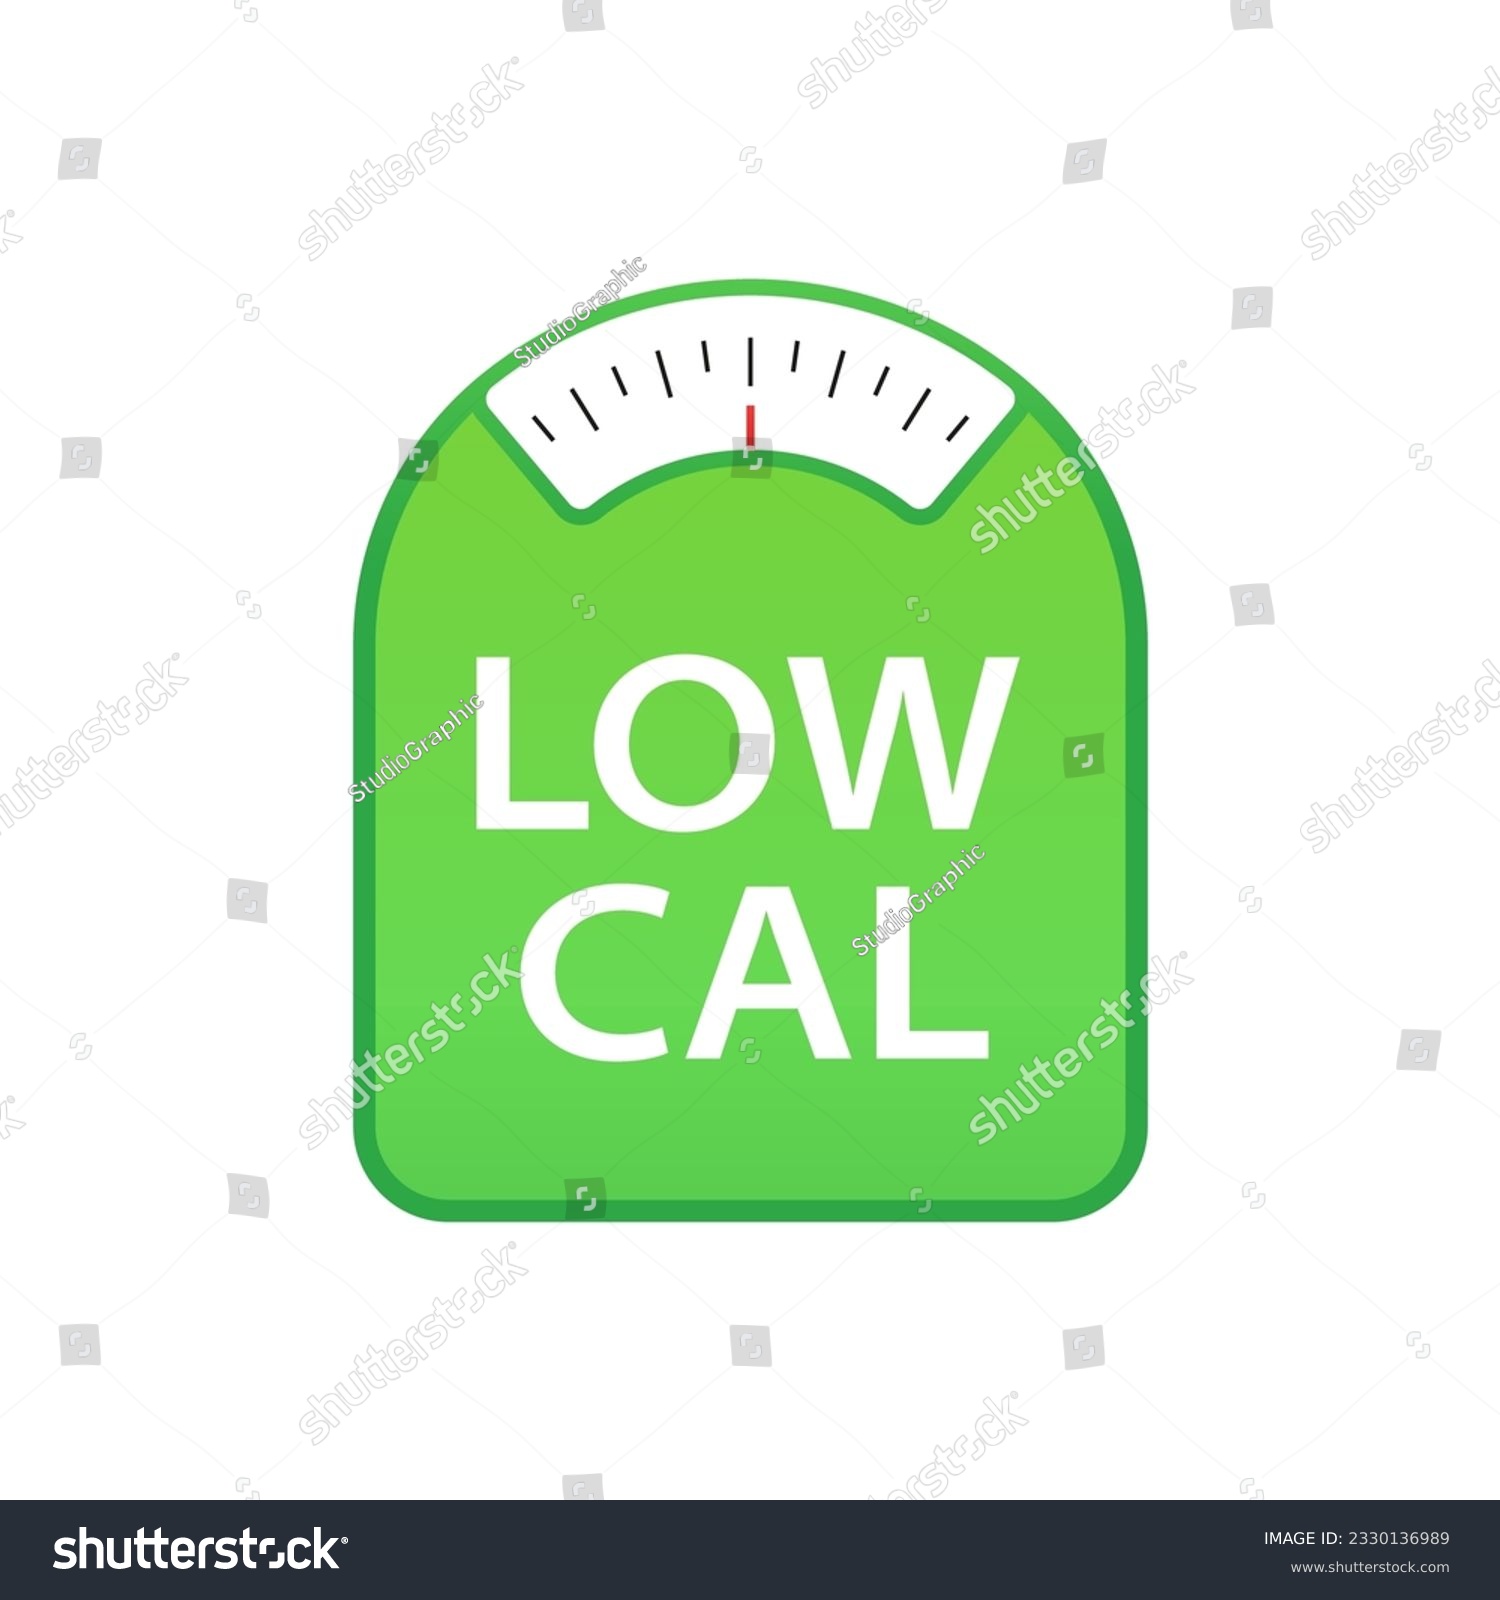 SVG of Zero calorie badge for diet food labeling - 0 kcal, energy fire, weight scales. Low cal. Green graphic weight and calory scale concept. Healthy eating banner. Vector illustration svg